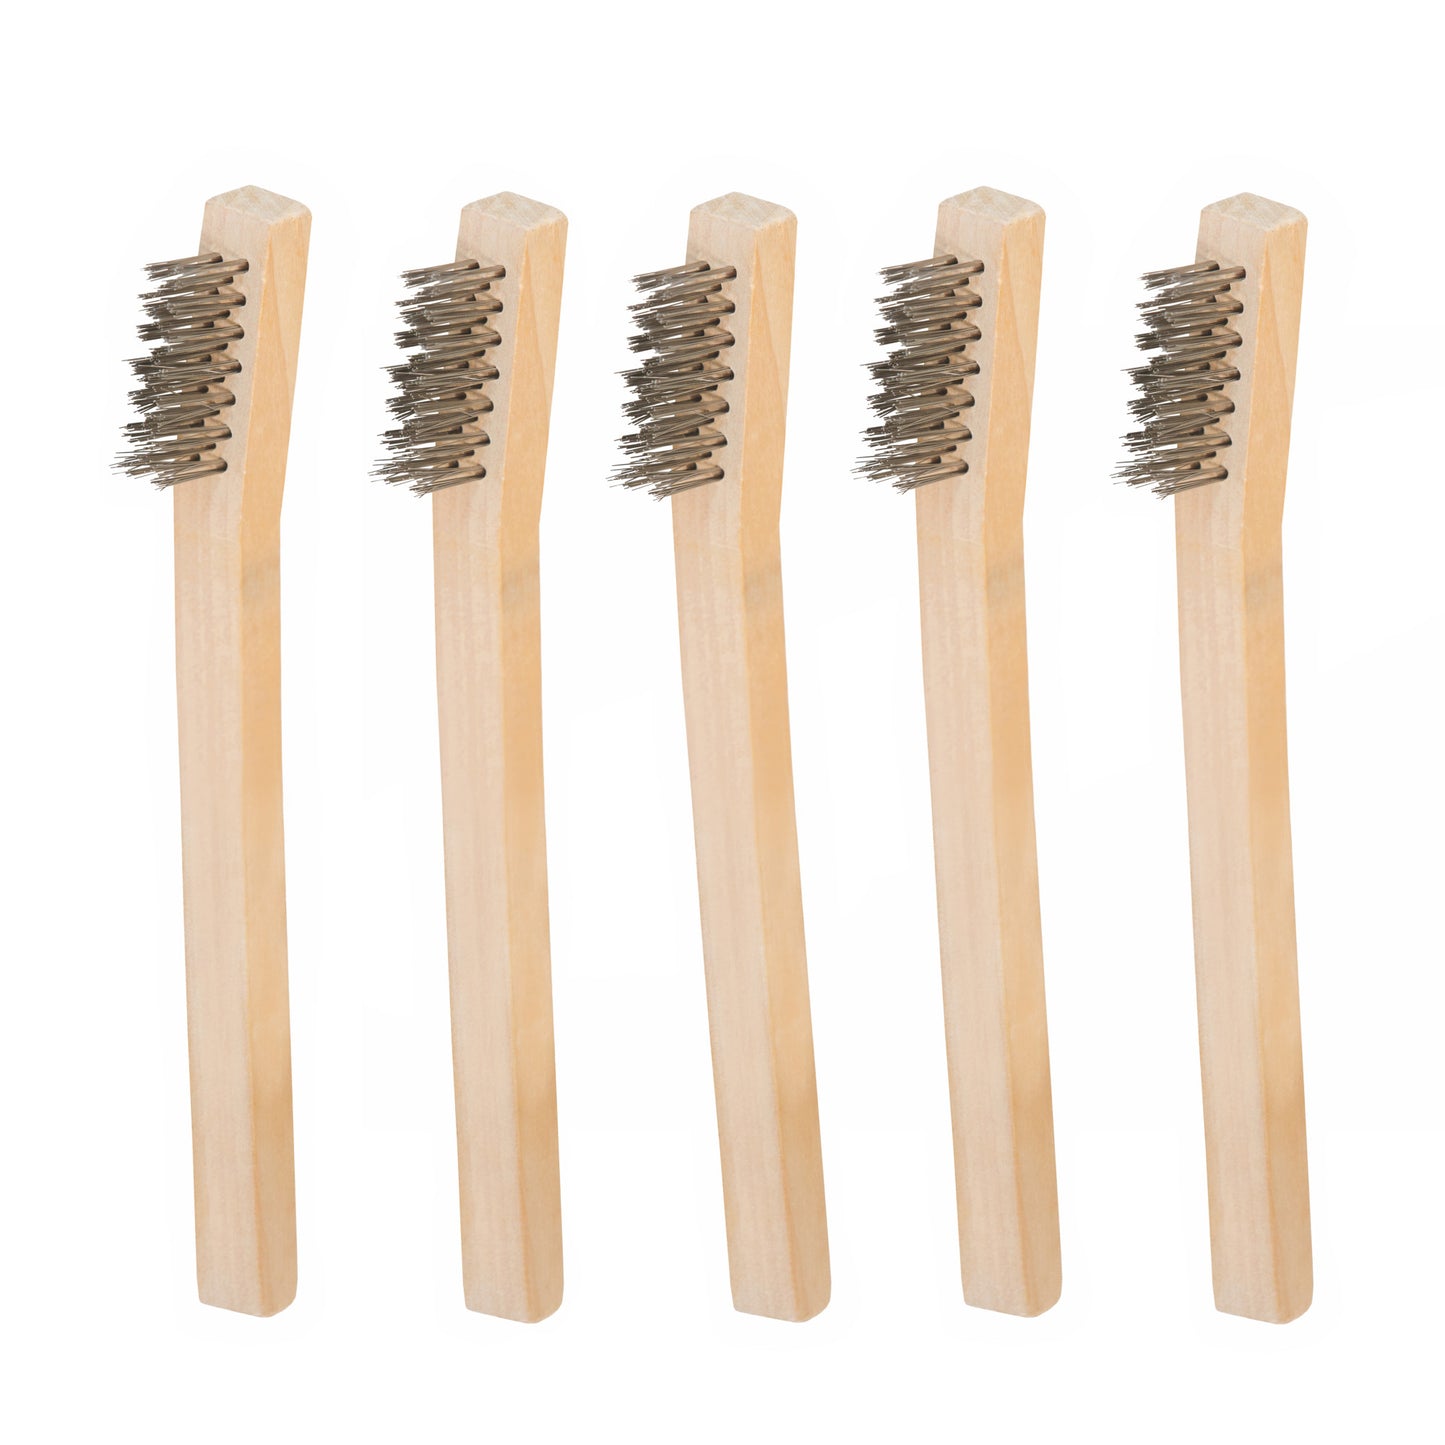 Stainless Steel 800-Bristle Count Wire Brush with Wood Handle, 5-Pack